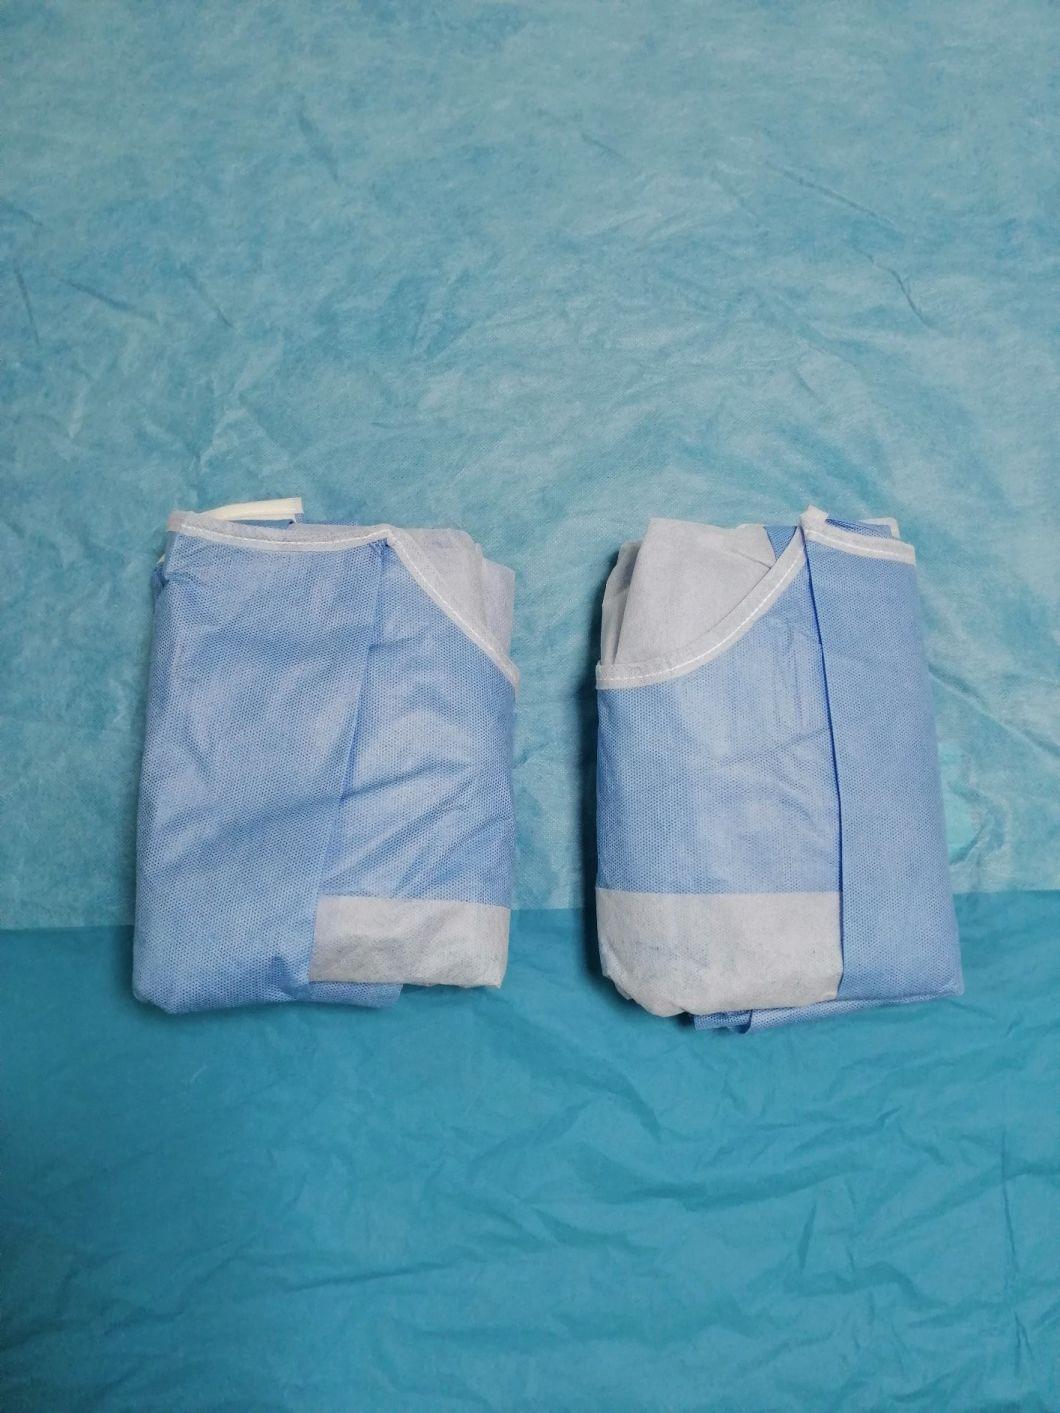 Disposable Sterile Surgical Arthroscopy Knee Pack